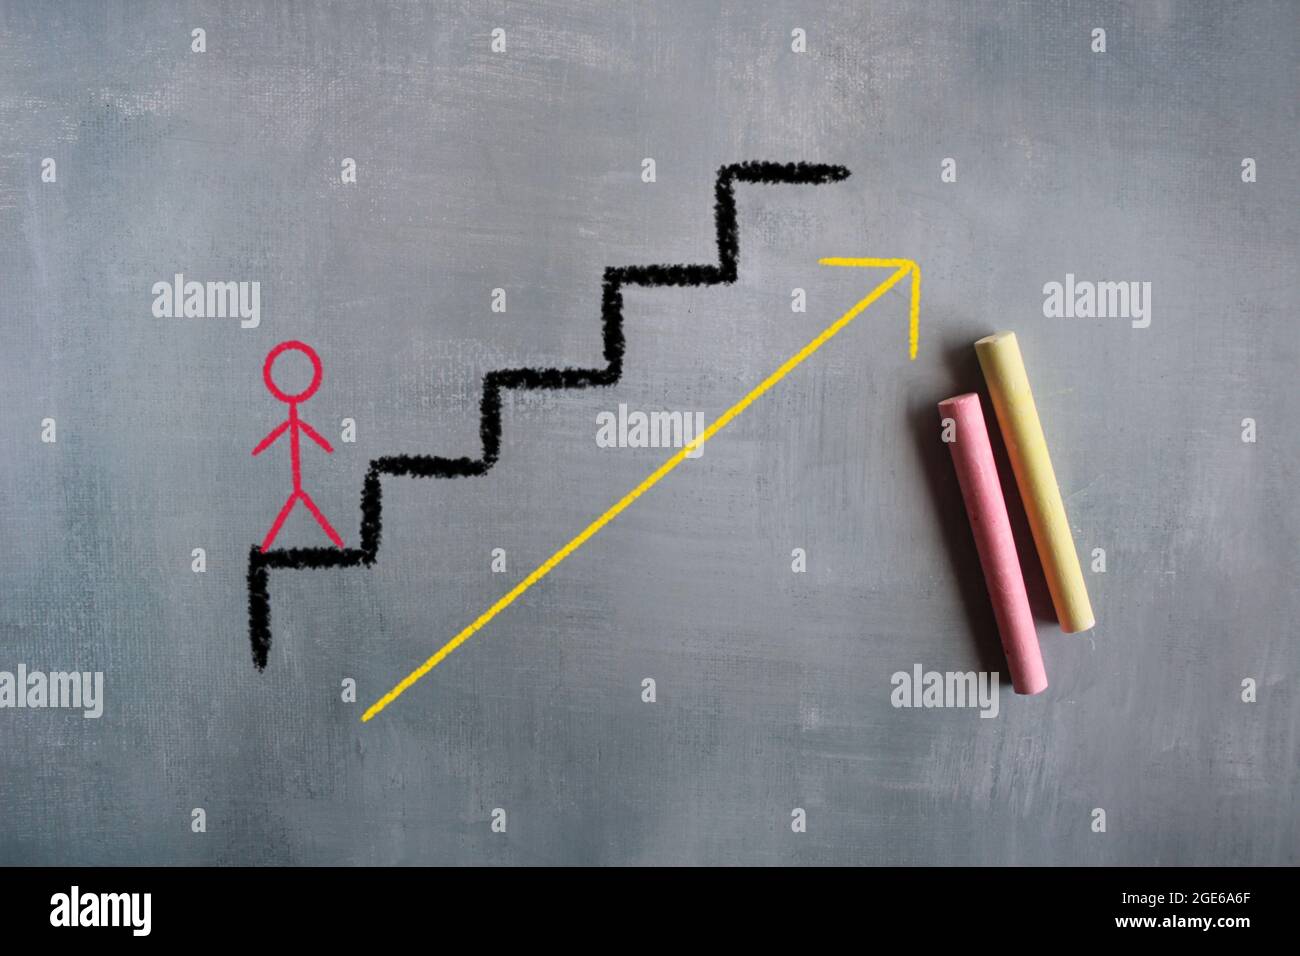 Career development, ladder of success, step by step to the top concept. Stock Photo